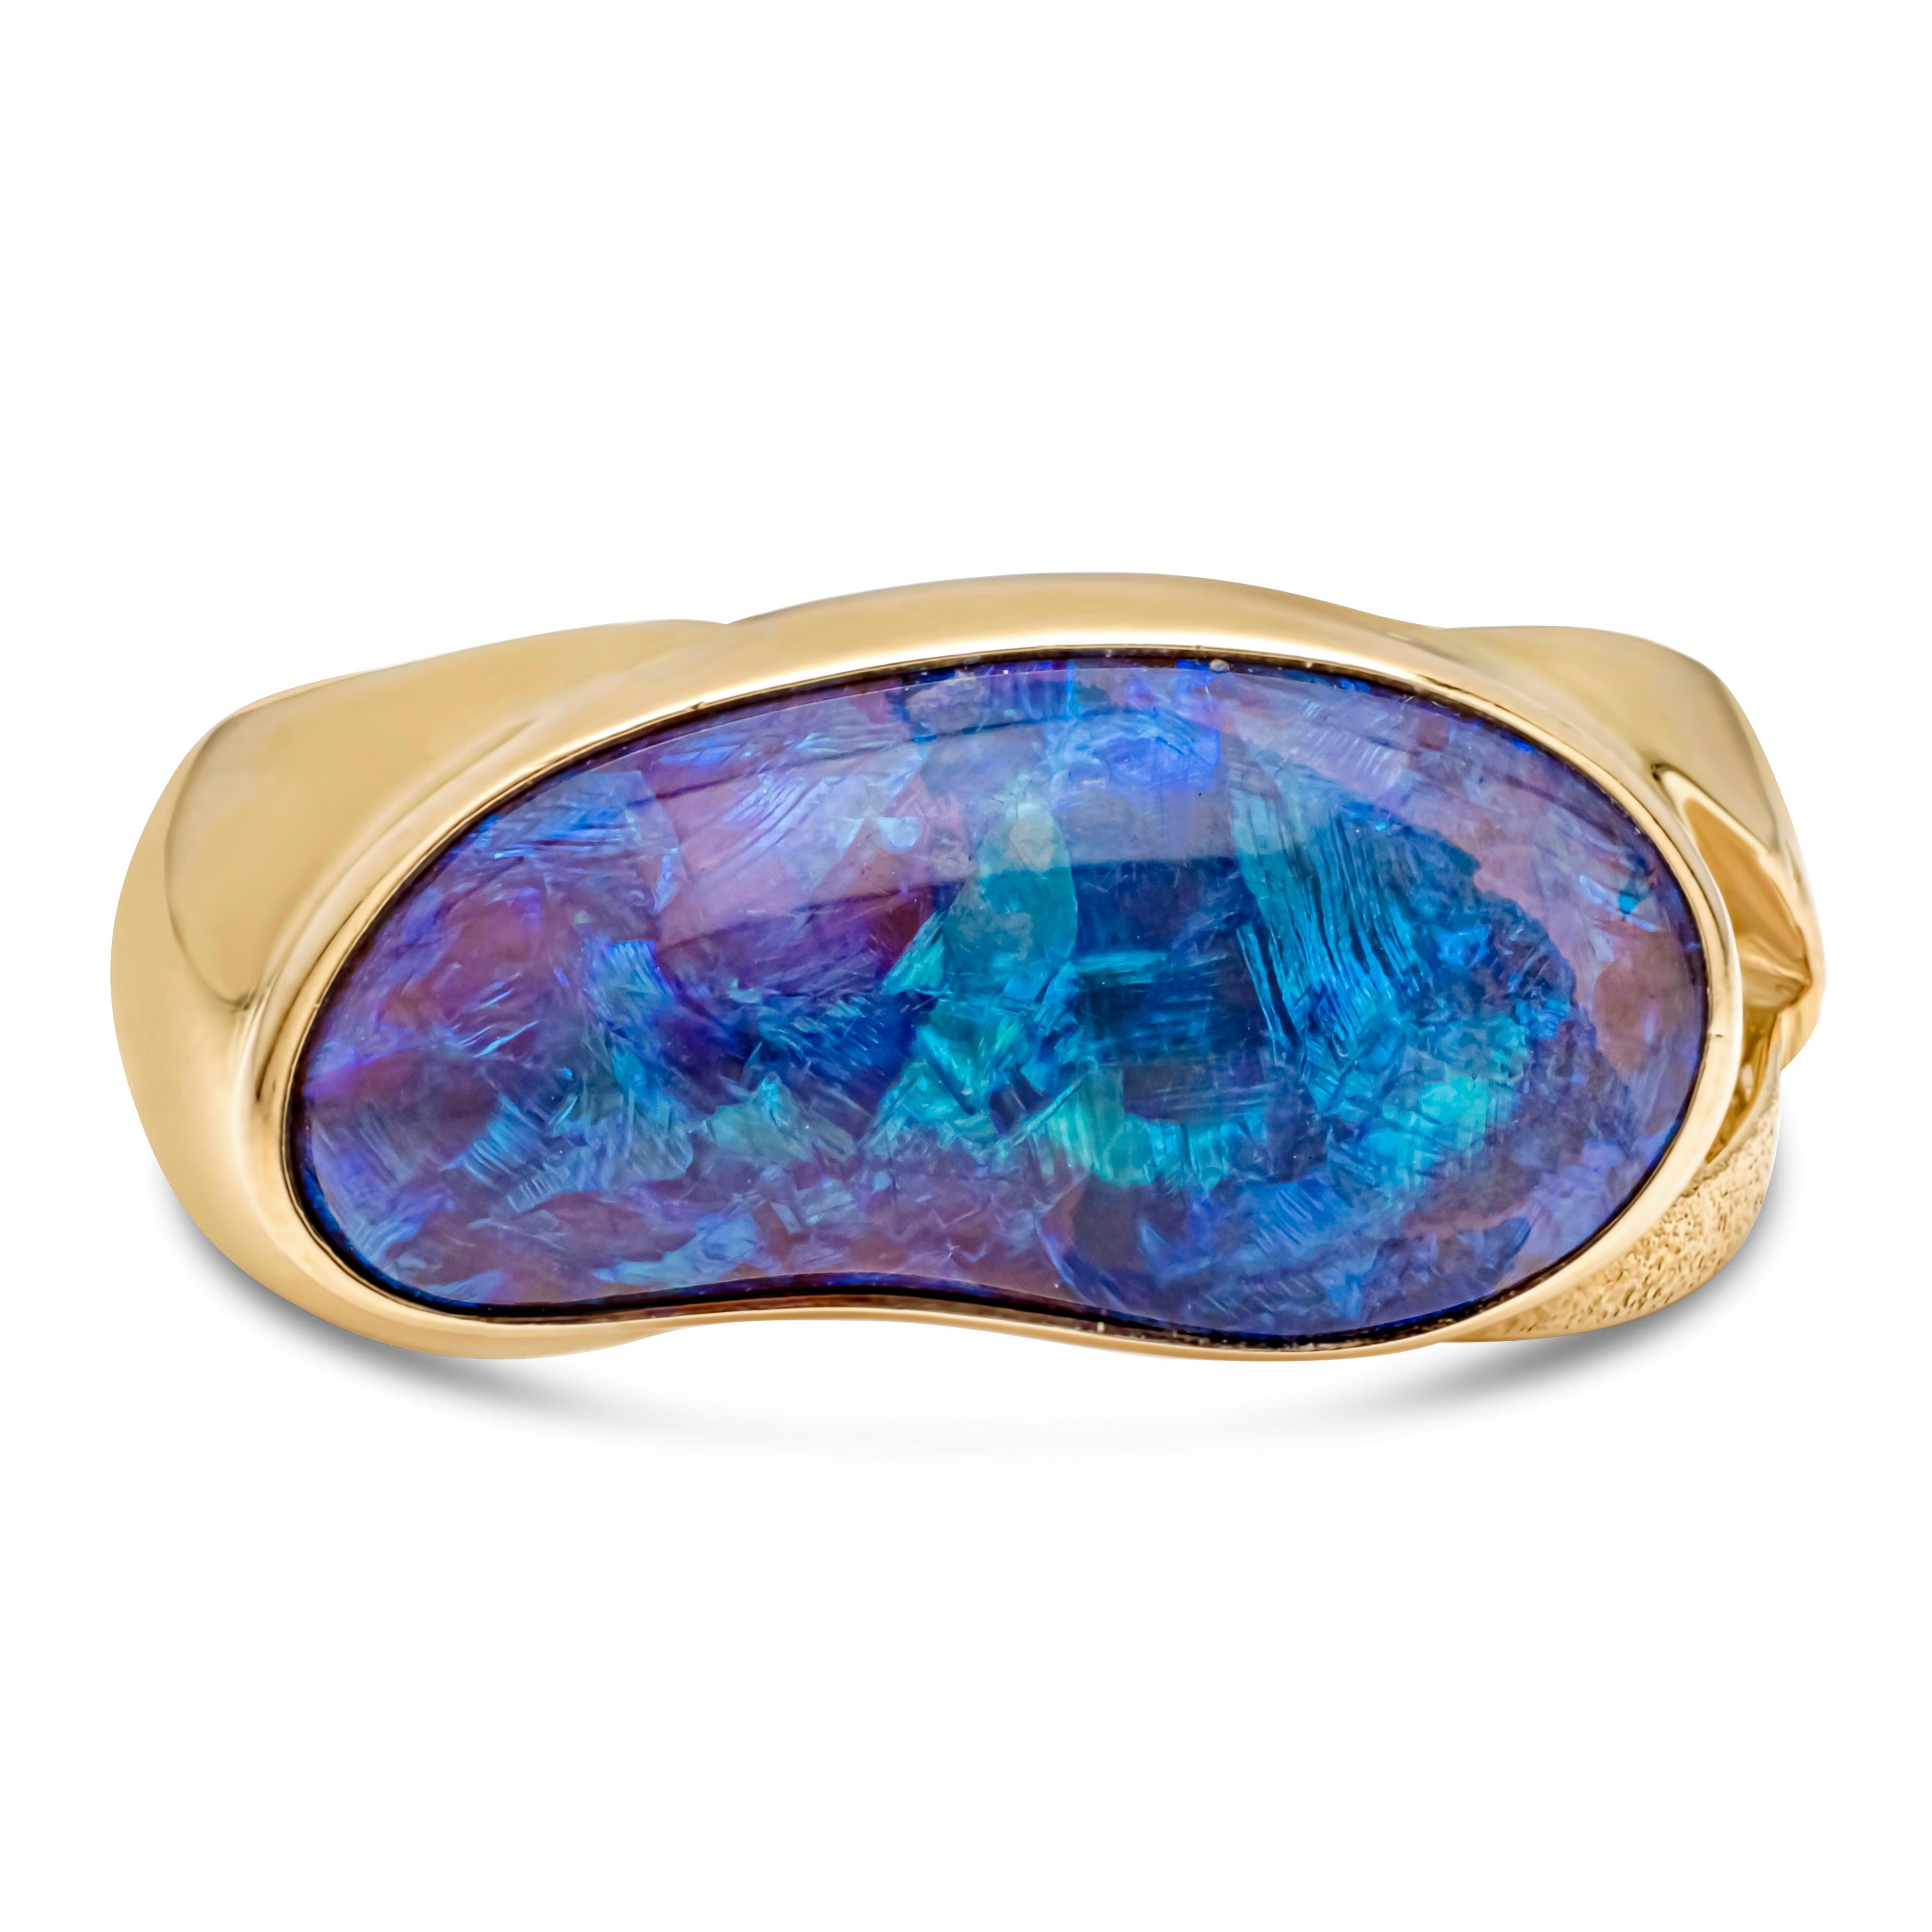 A stunning and beautiful GIA certified 9.00 carats natural black opal freeform gemstone perfectly set on 18K yellow gold. This ring is 11.60 mm in length and 23.16 mm in width. Size 8.75 US, resizable upon request.

Roman Malakov is a custom house,